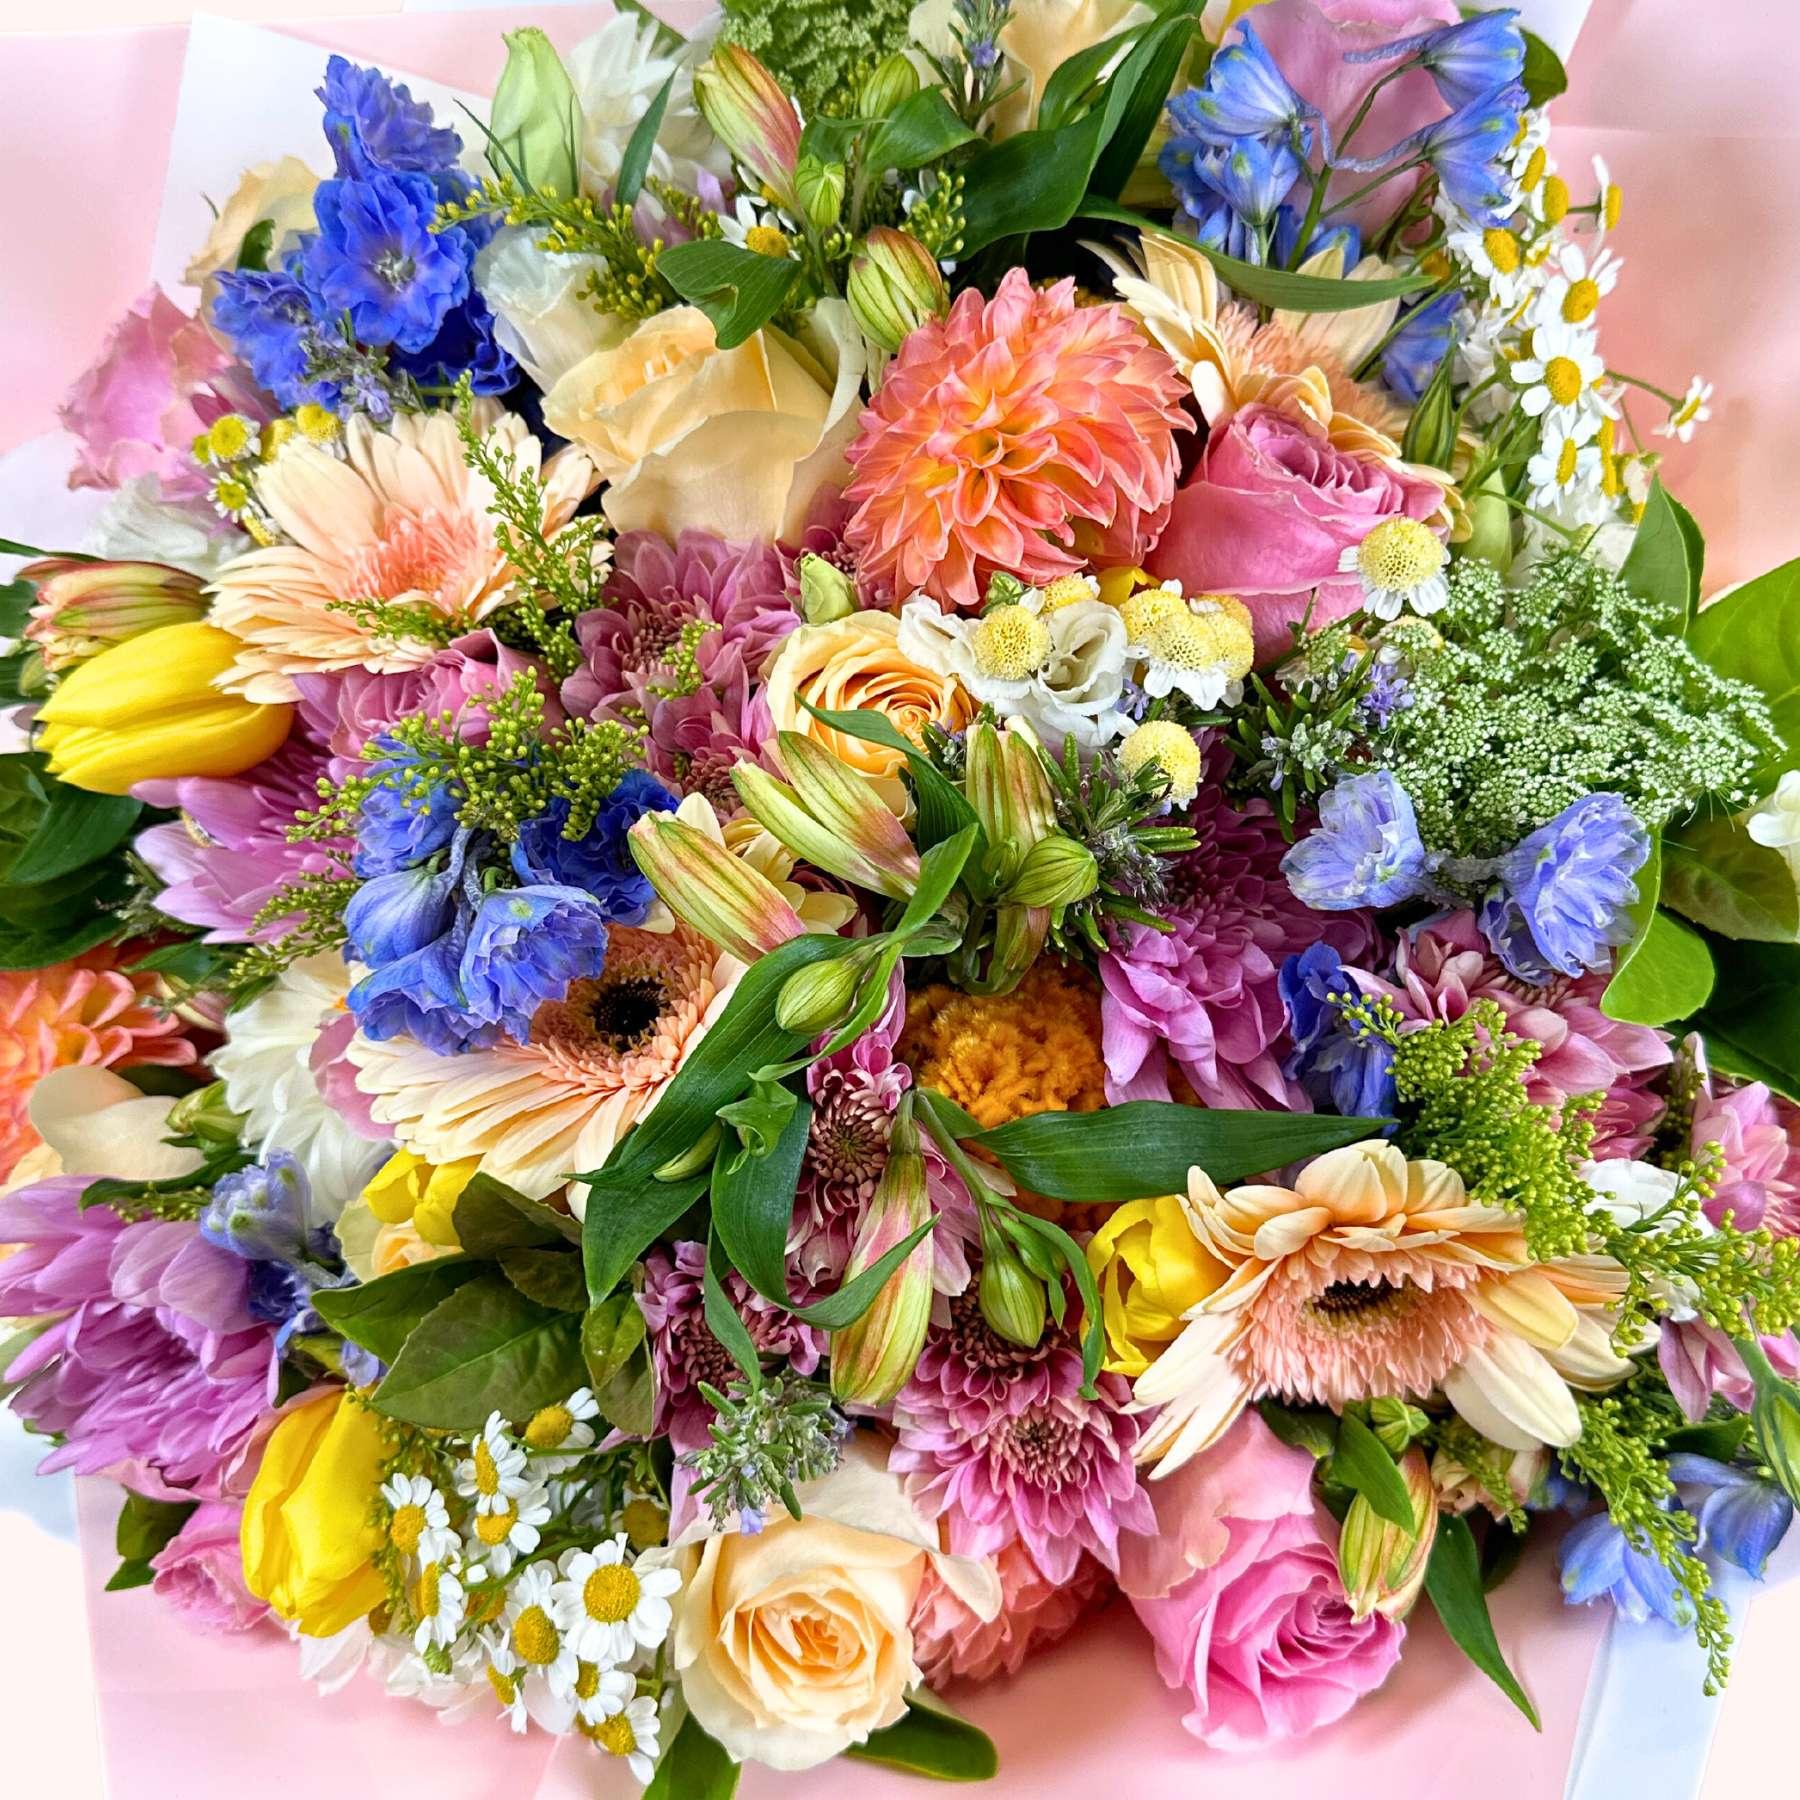 A woman with bright eyes smiling as she holds the Pink Passion Flower Bouquet, an abundant arrangement of pink, blue, yellow, and cream flowers, symbolizing a vibrant celebration of life and colour, available at Fabulous Flowers and Gifts.